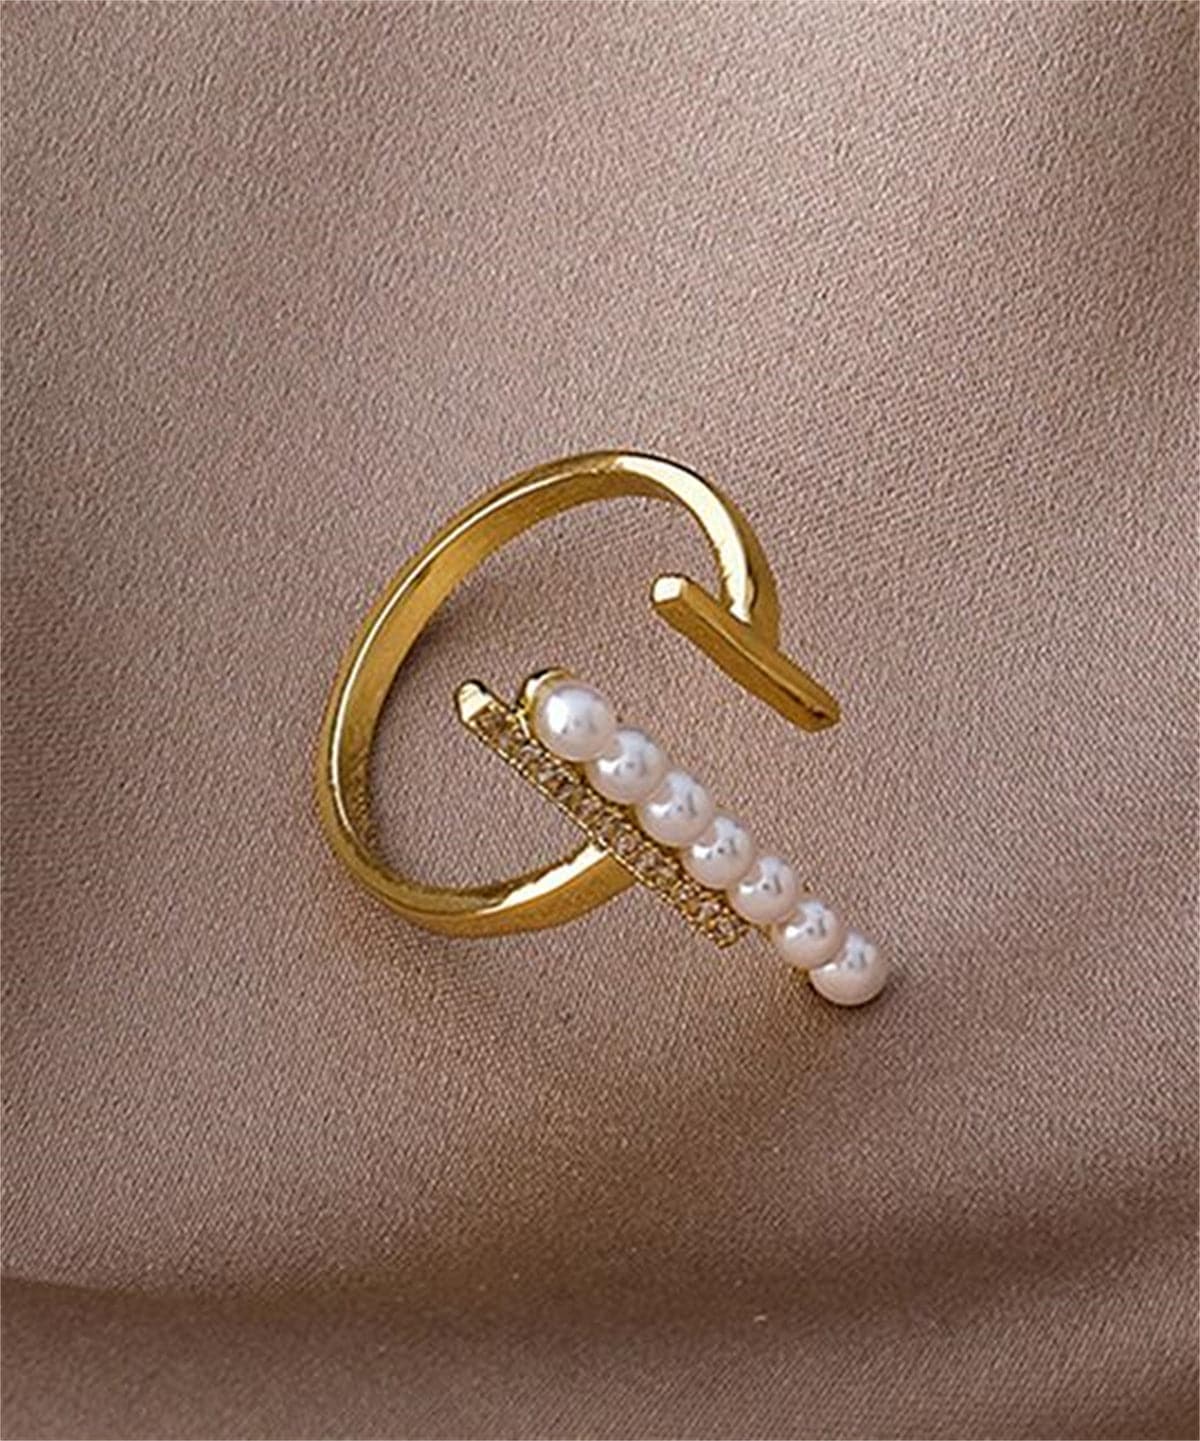 Pearl & Cubic Zirconia 18K Gold-Plated Bar Open Ring